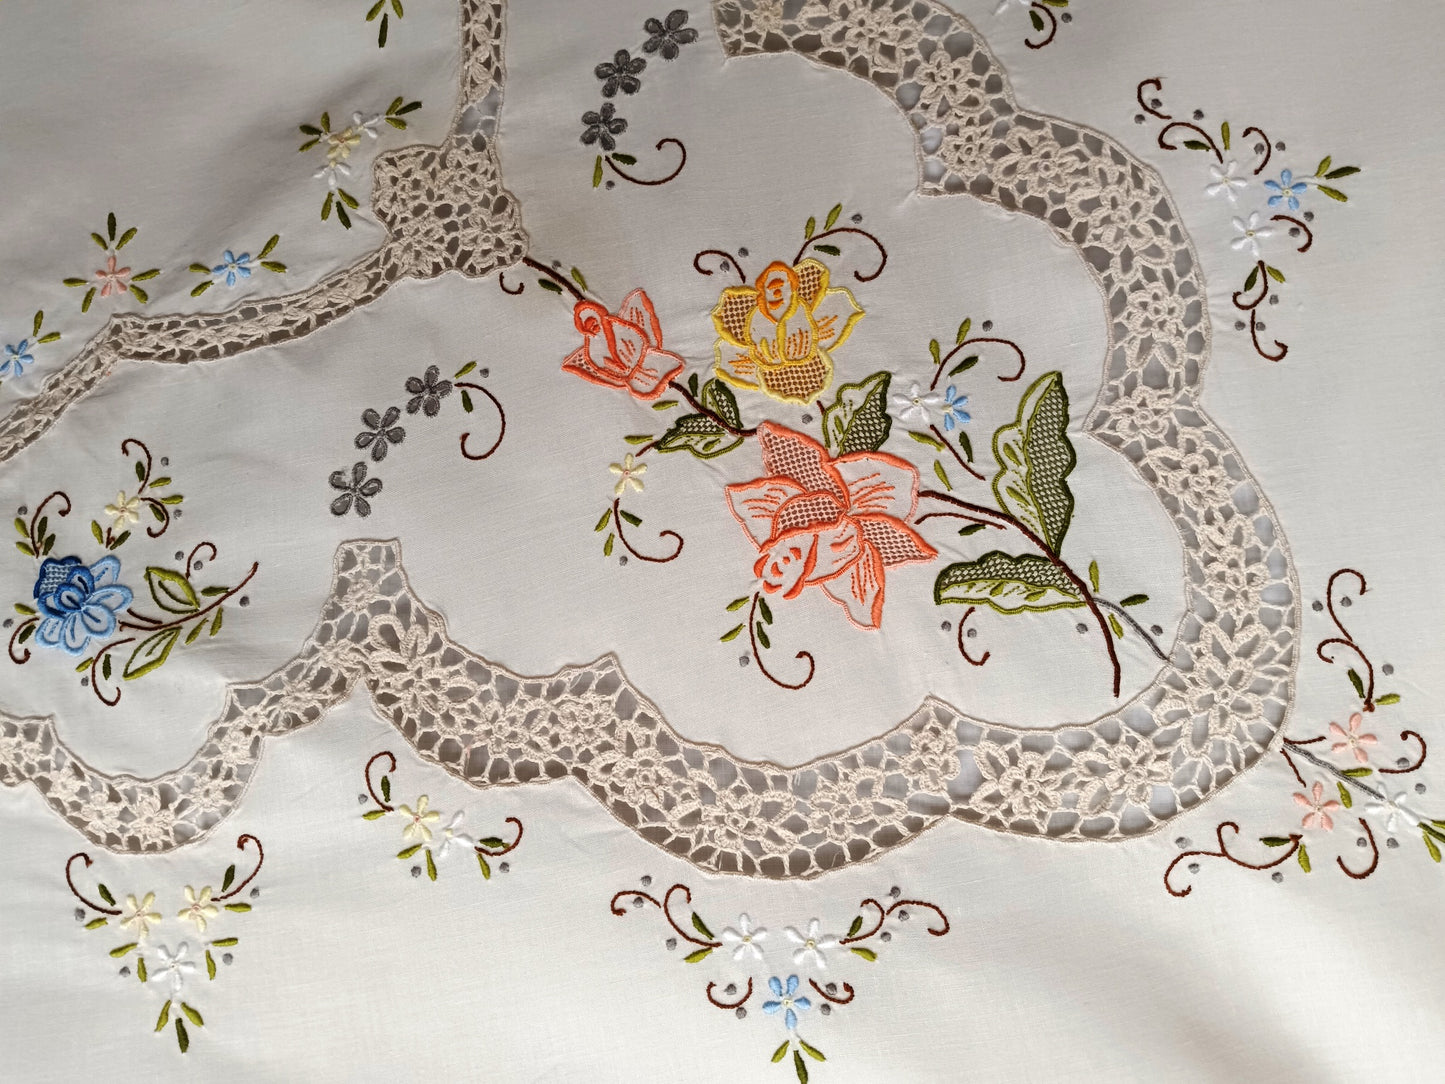 Vintage Elegant Tablecloth Crochet Lace Embroidered Floral Beige Linen Cotton Medallion Rectangle Dining Table Cover 66” W x 82“L